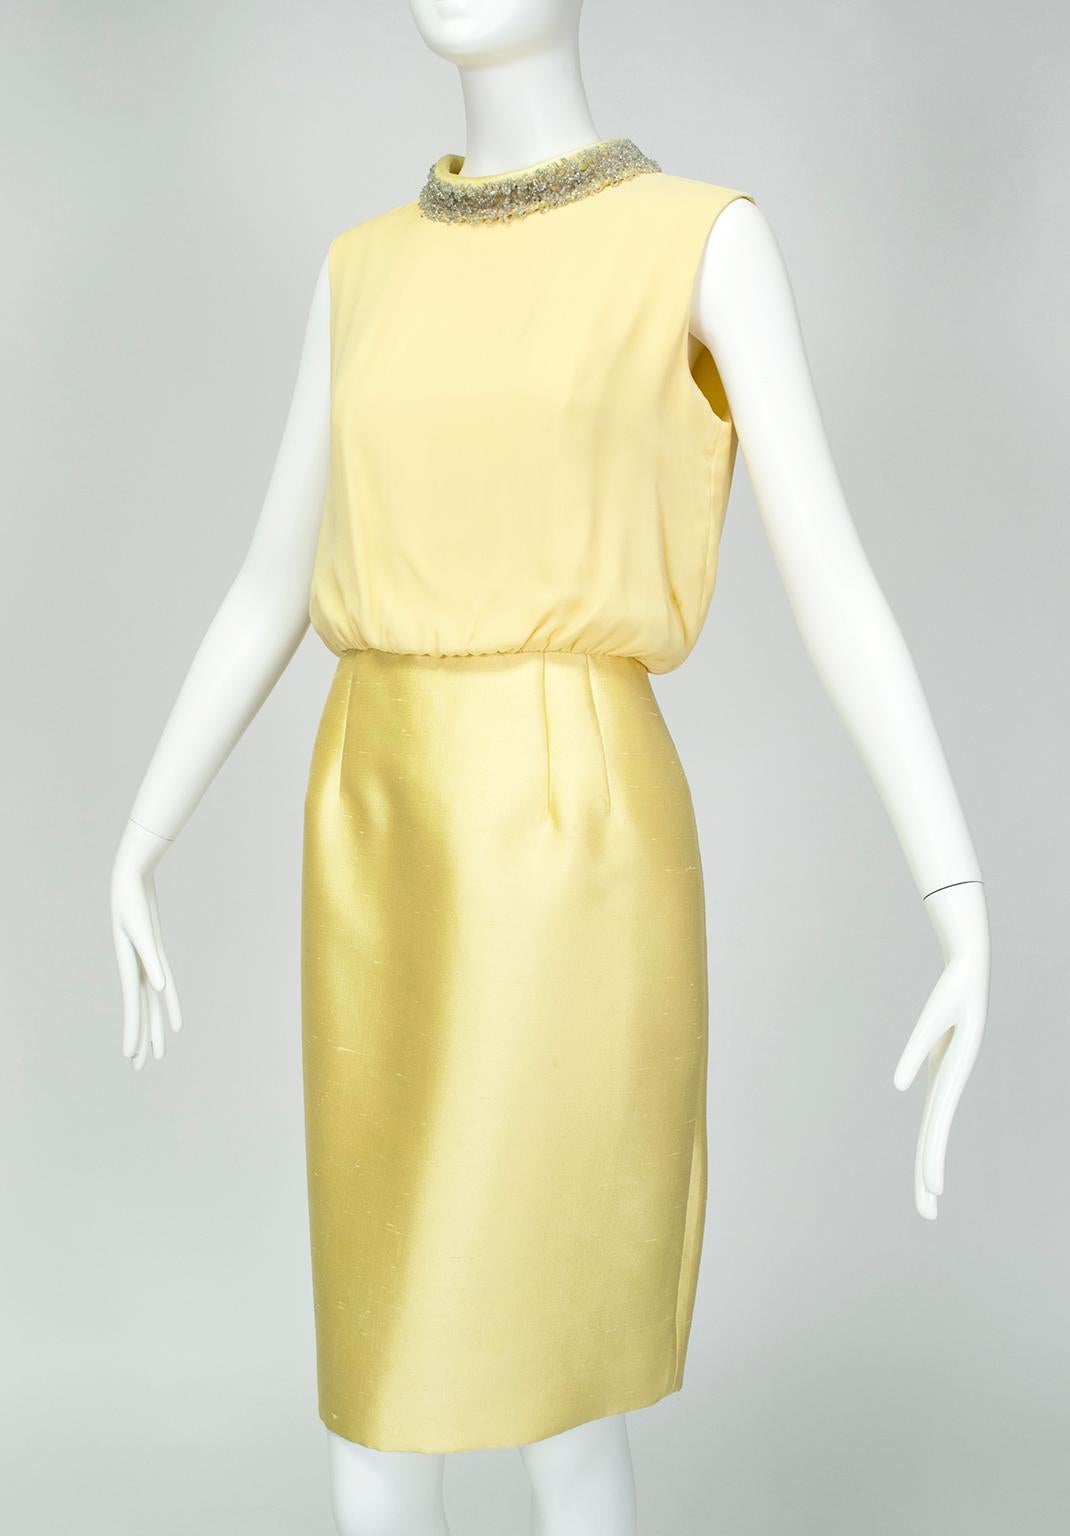 Yellow Beaded Chantung Roll Neck Dress Suit and Empire Jacket – M, 1960s In Good Condition For Sale In Tucson, AZ